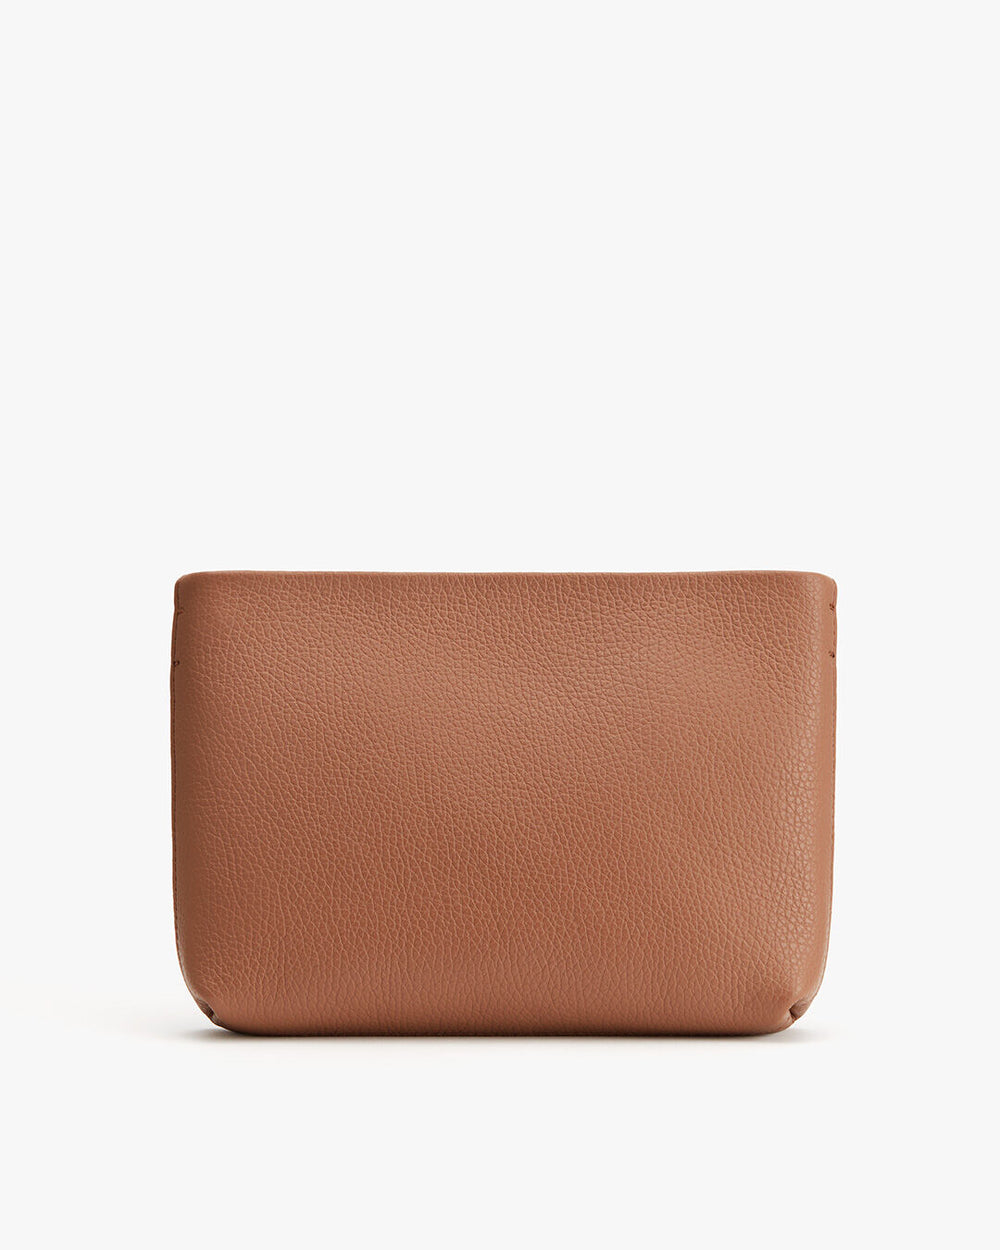 Leather pouch on a plain background.